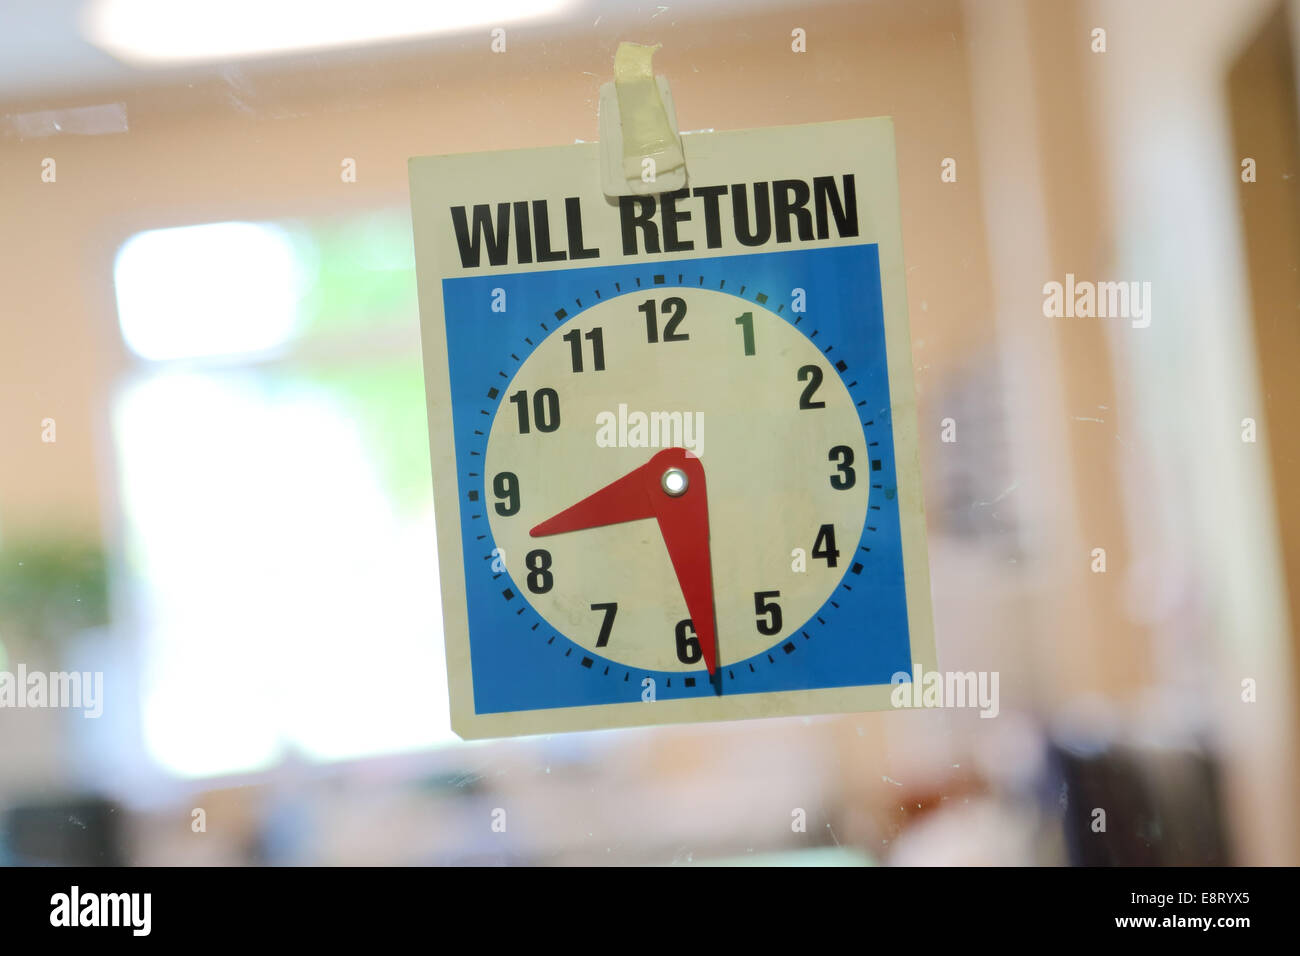 Will return sign with office background Stock Photo